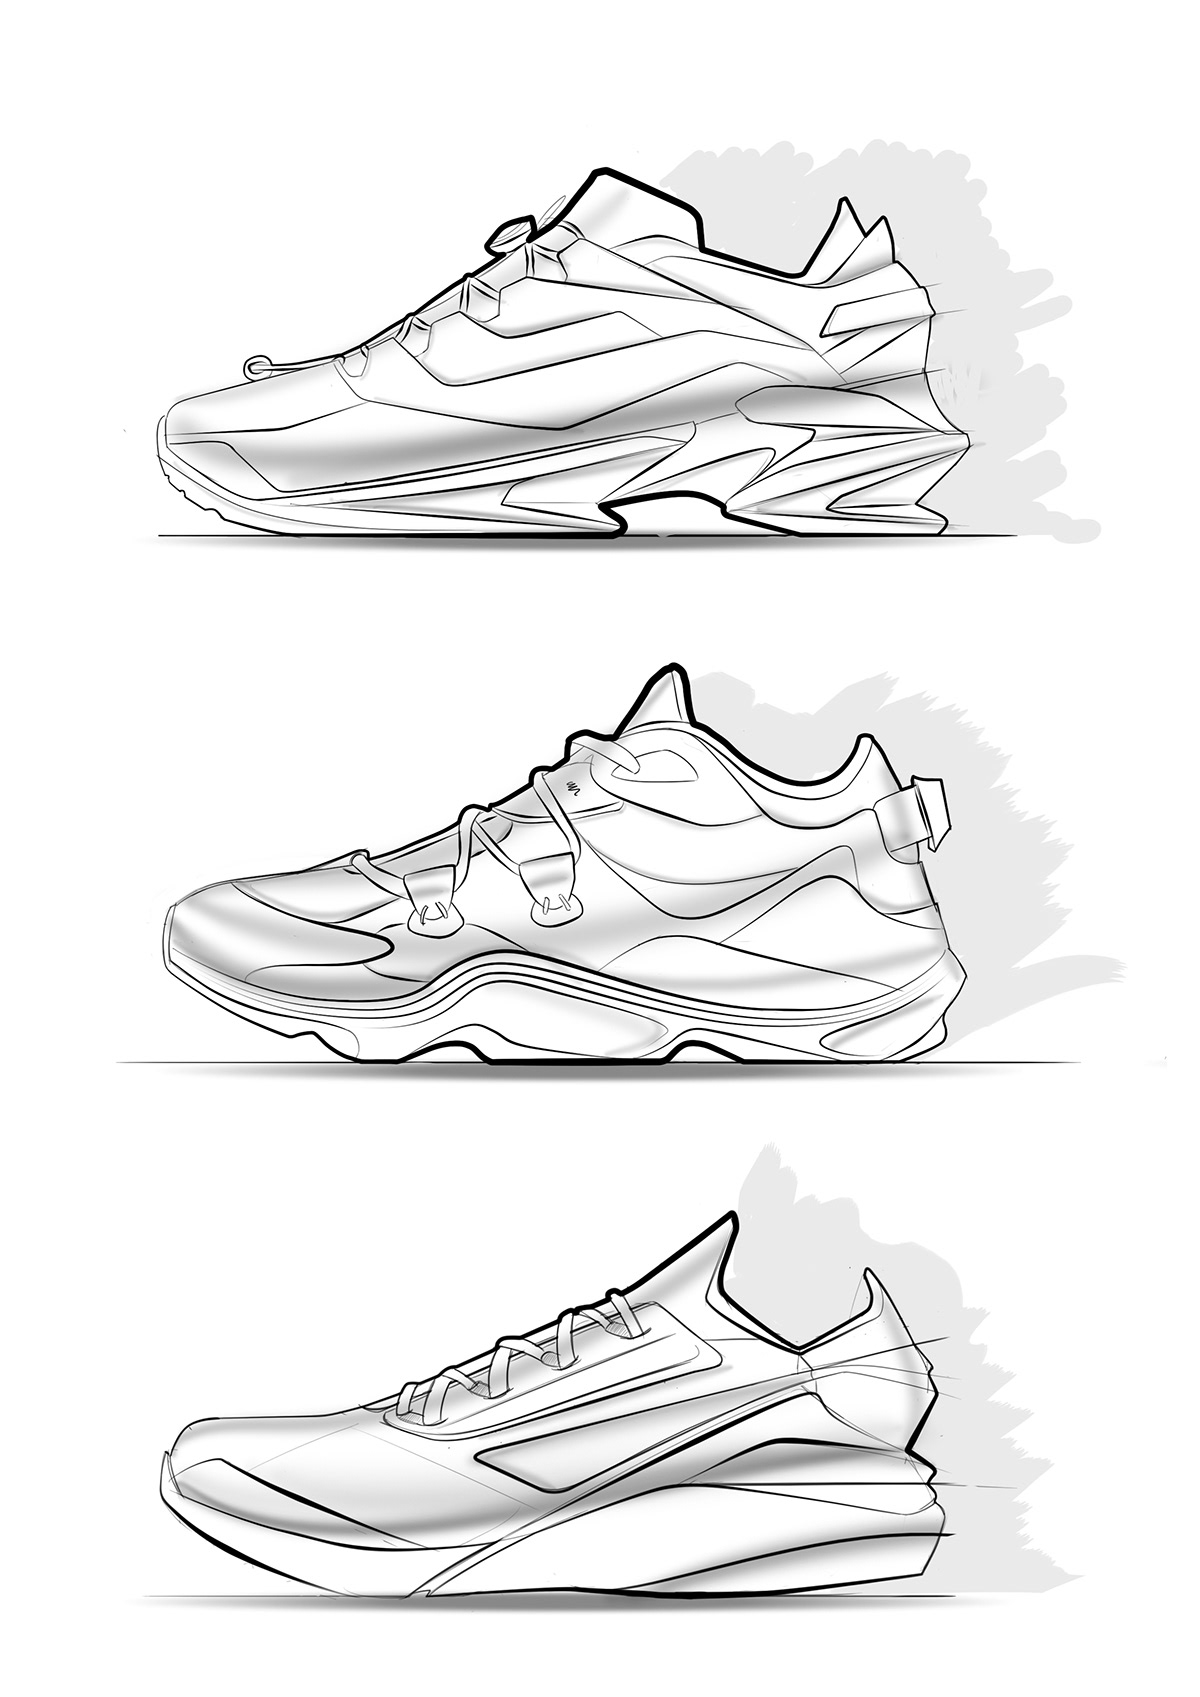 Sneakers sketches :: Behance